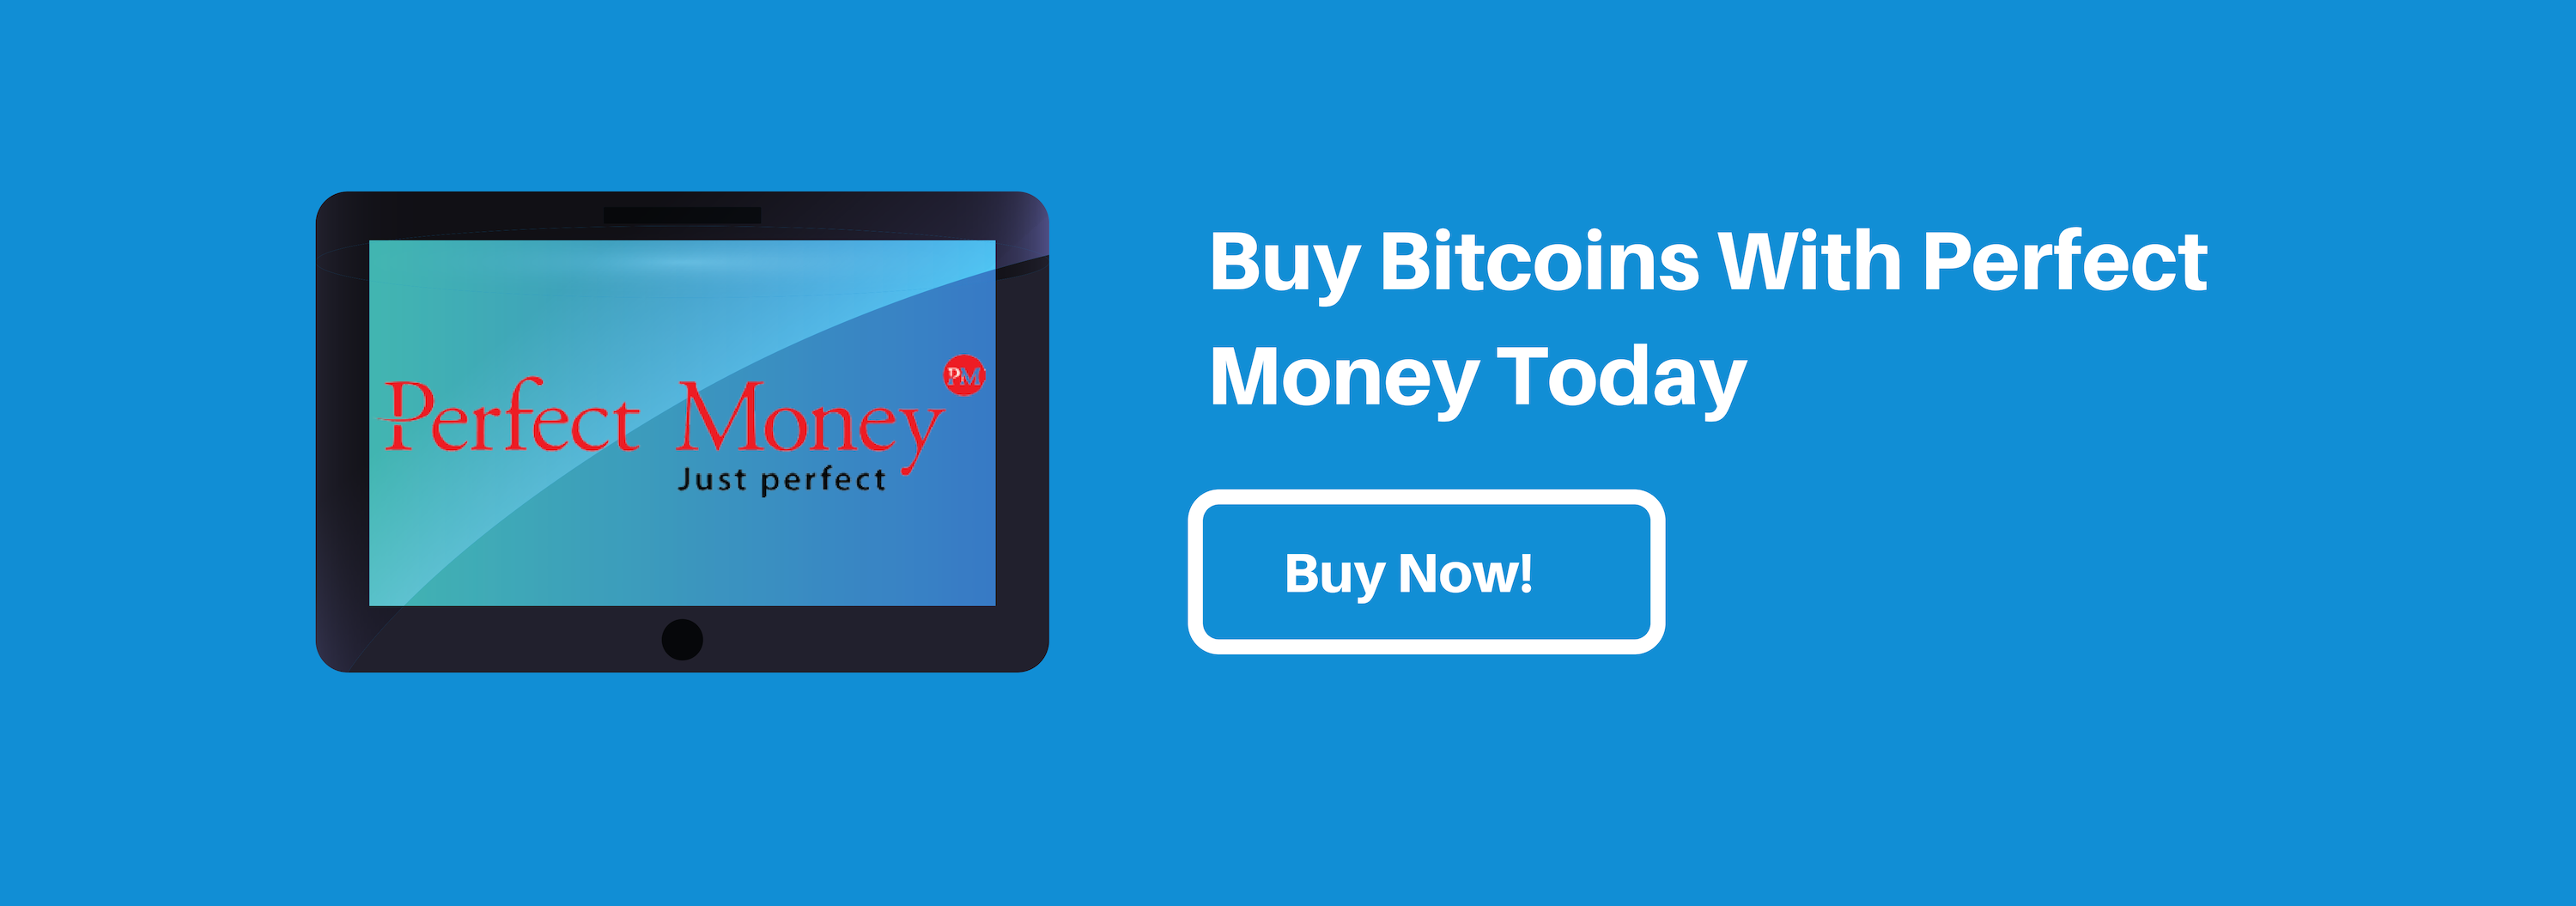 Buy Bitcoins with Perfect Money